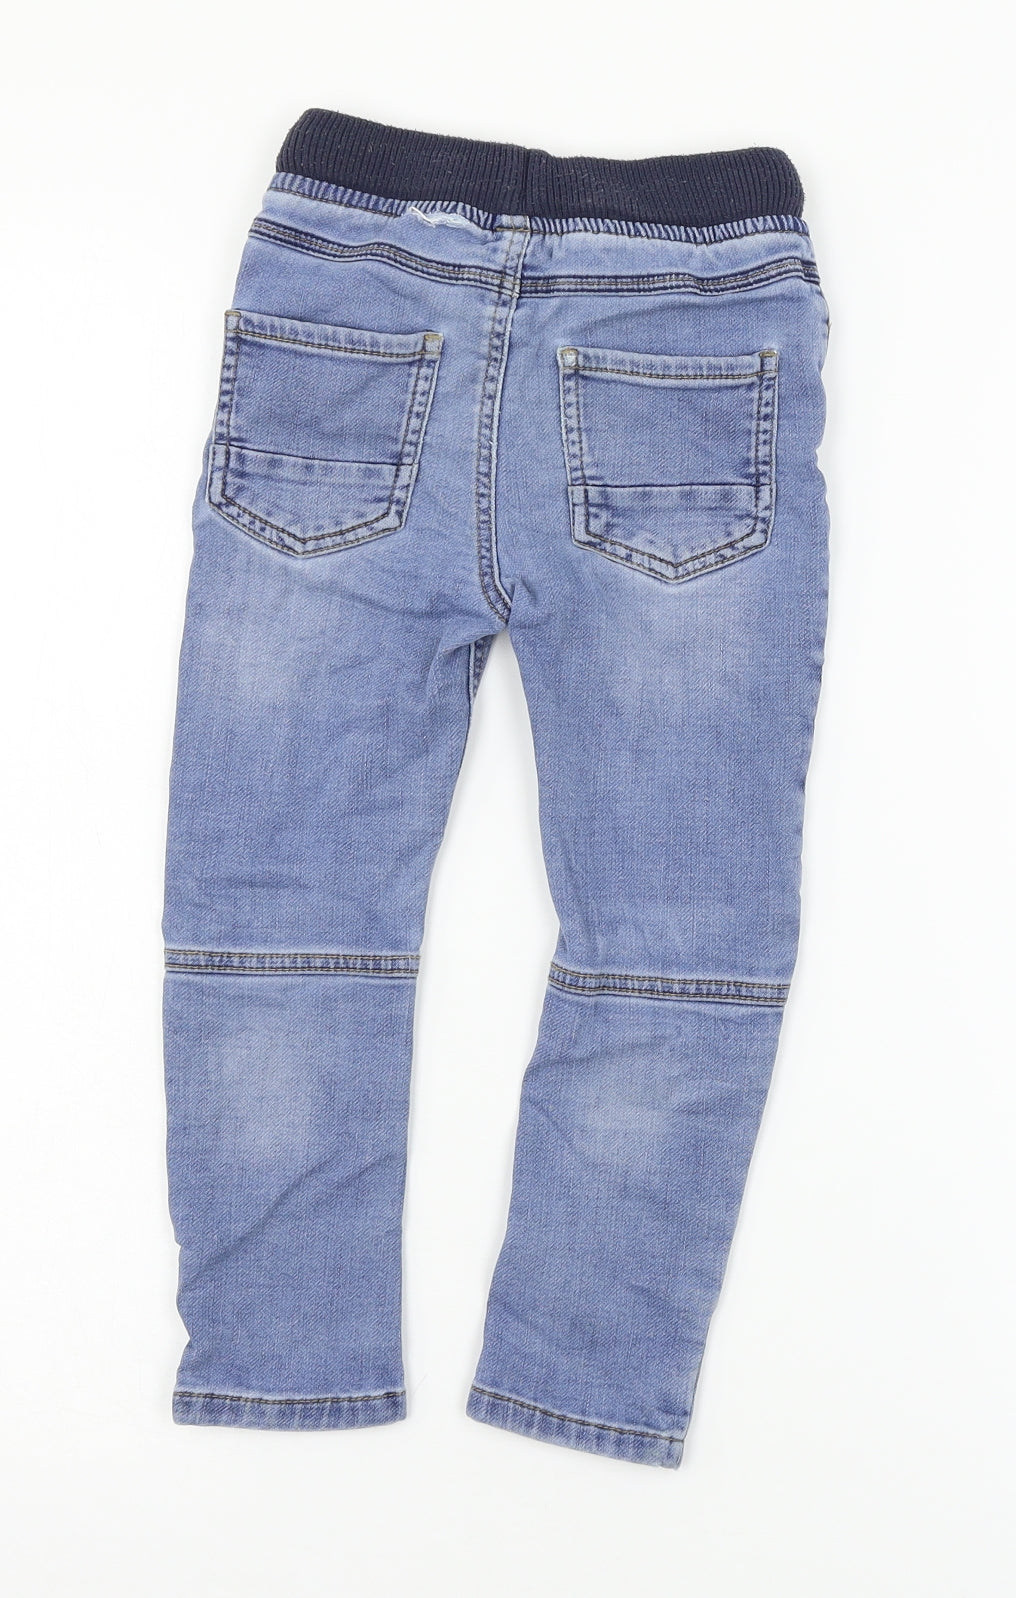 Matalan Boys Blue  Denim Tapered Jeans Size 2-3 Years